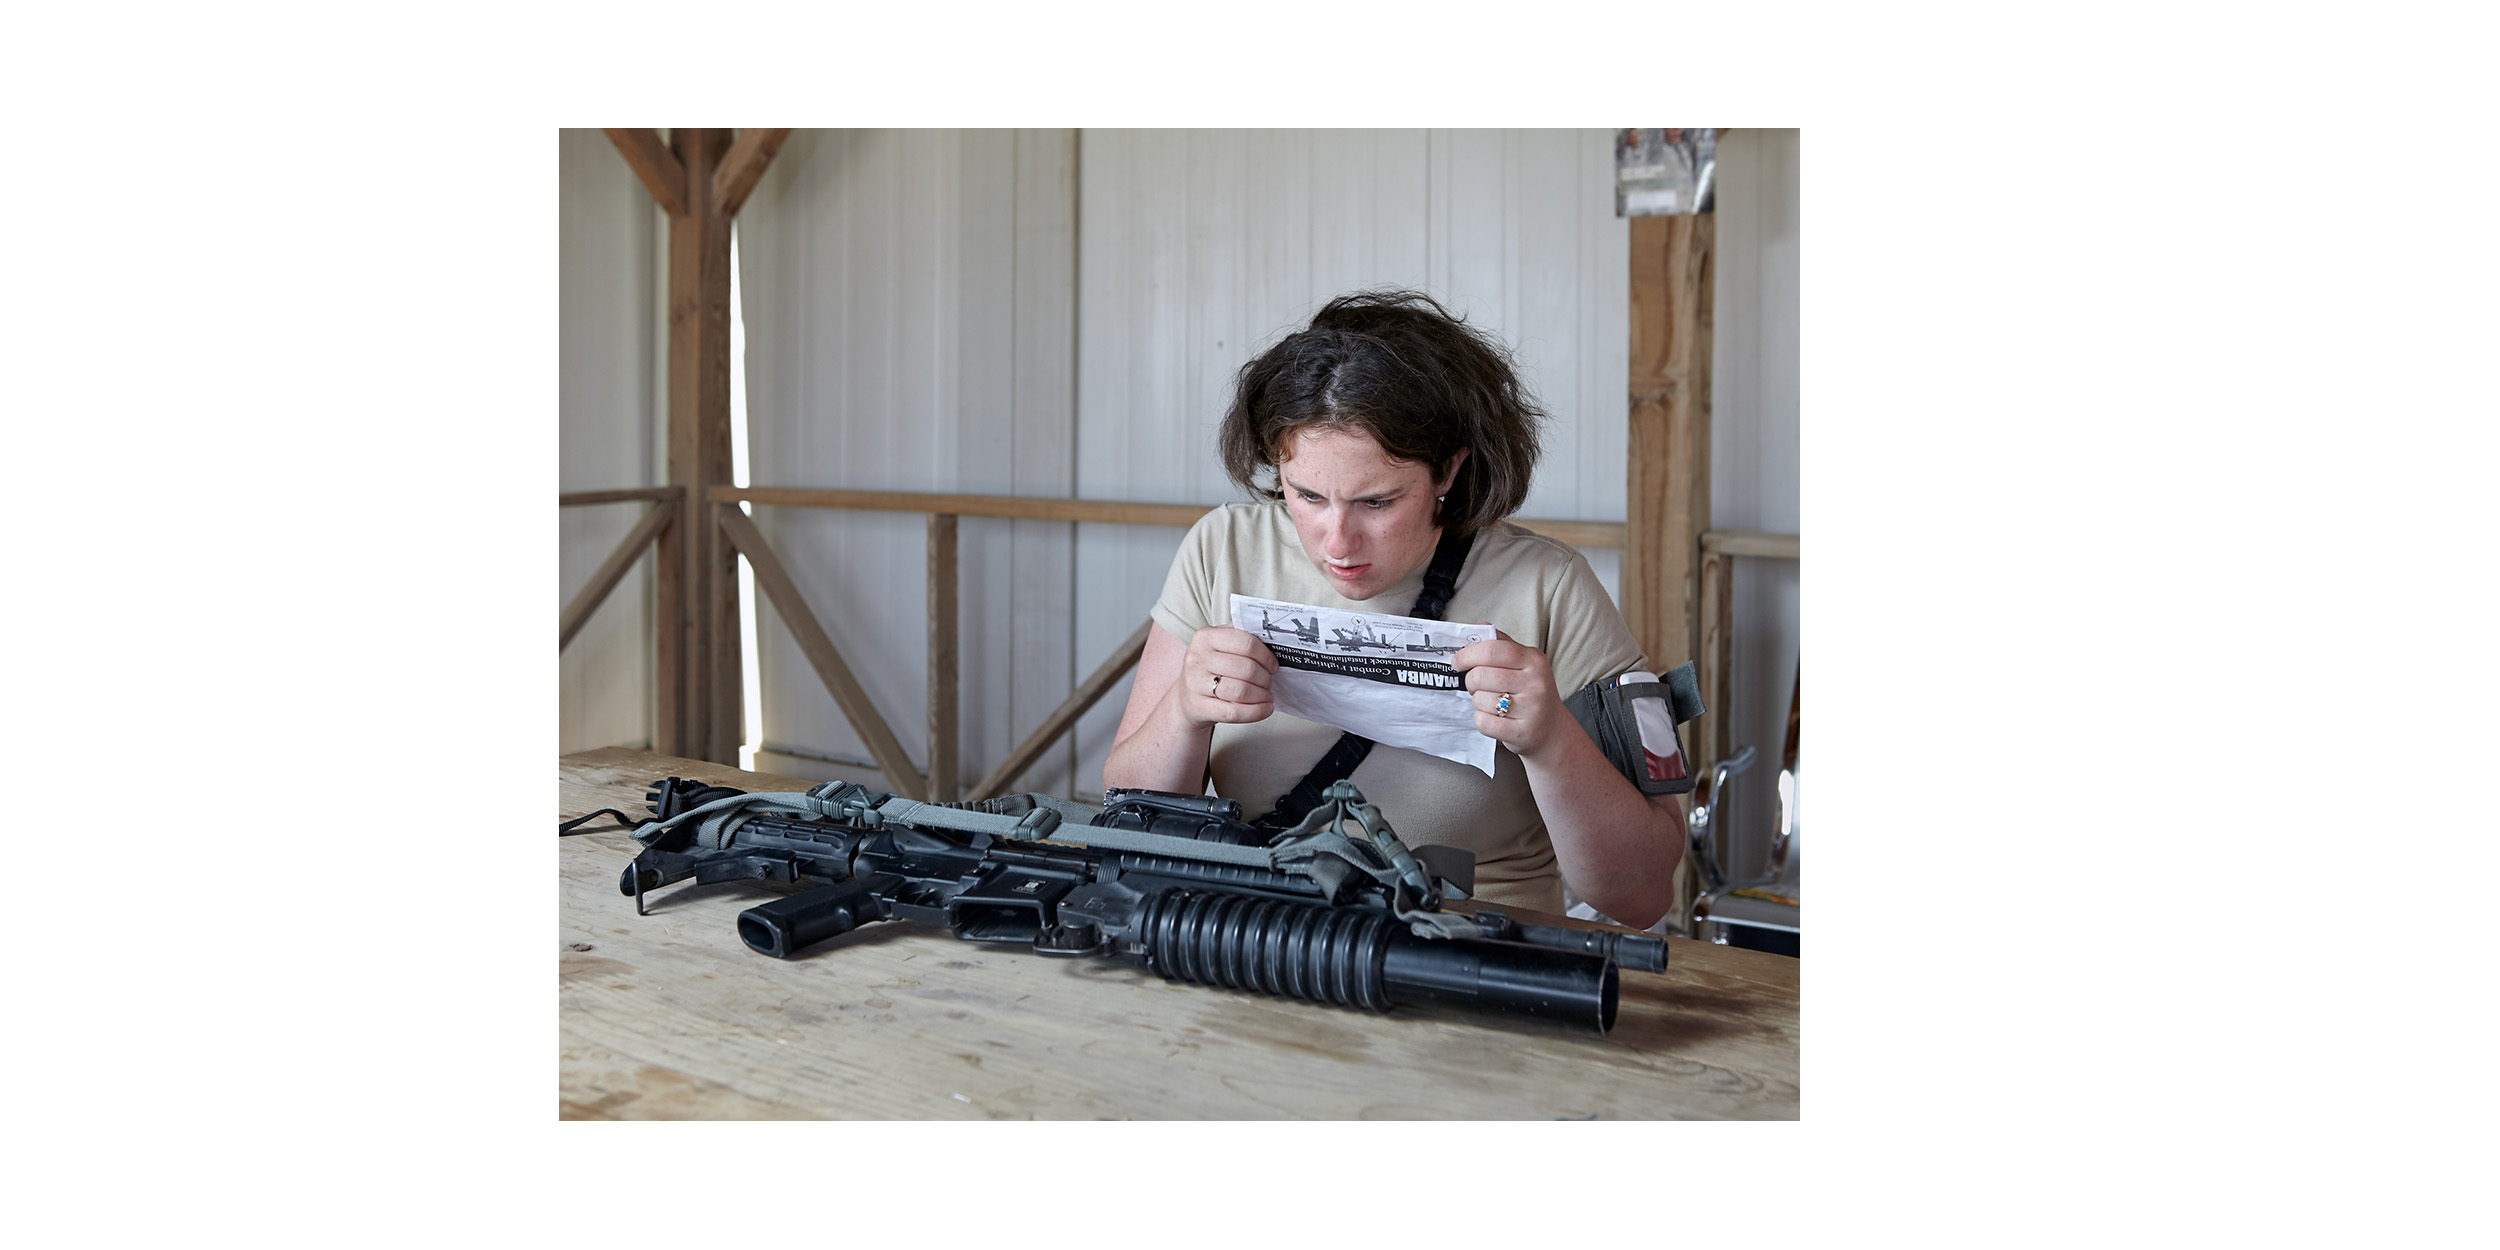  Weapon Maintenance, Kandahar, Afghanistan, from the series ‘The Thing About Remembering’ 